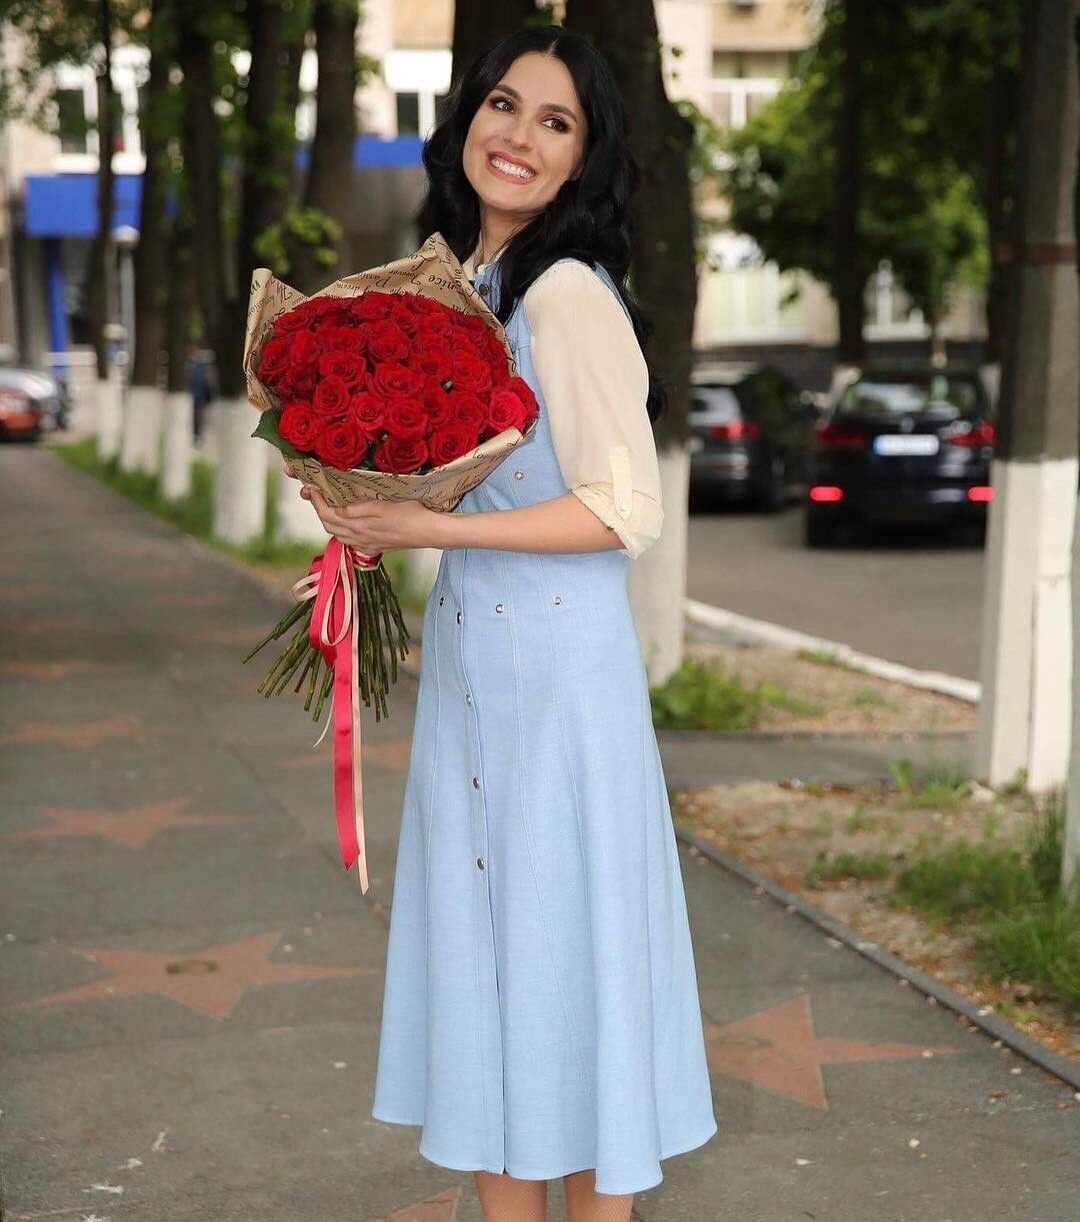 Masha Yefrosynina celebrates her 45th birthday: how the Ukrainian TV presenter has changed over the years and what she looks like now. Photo